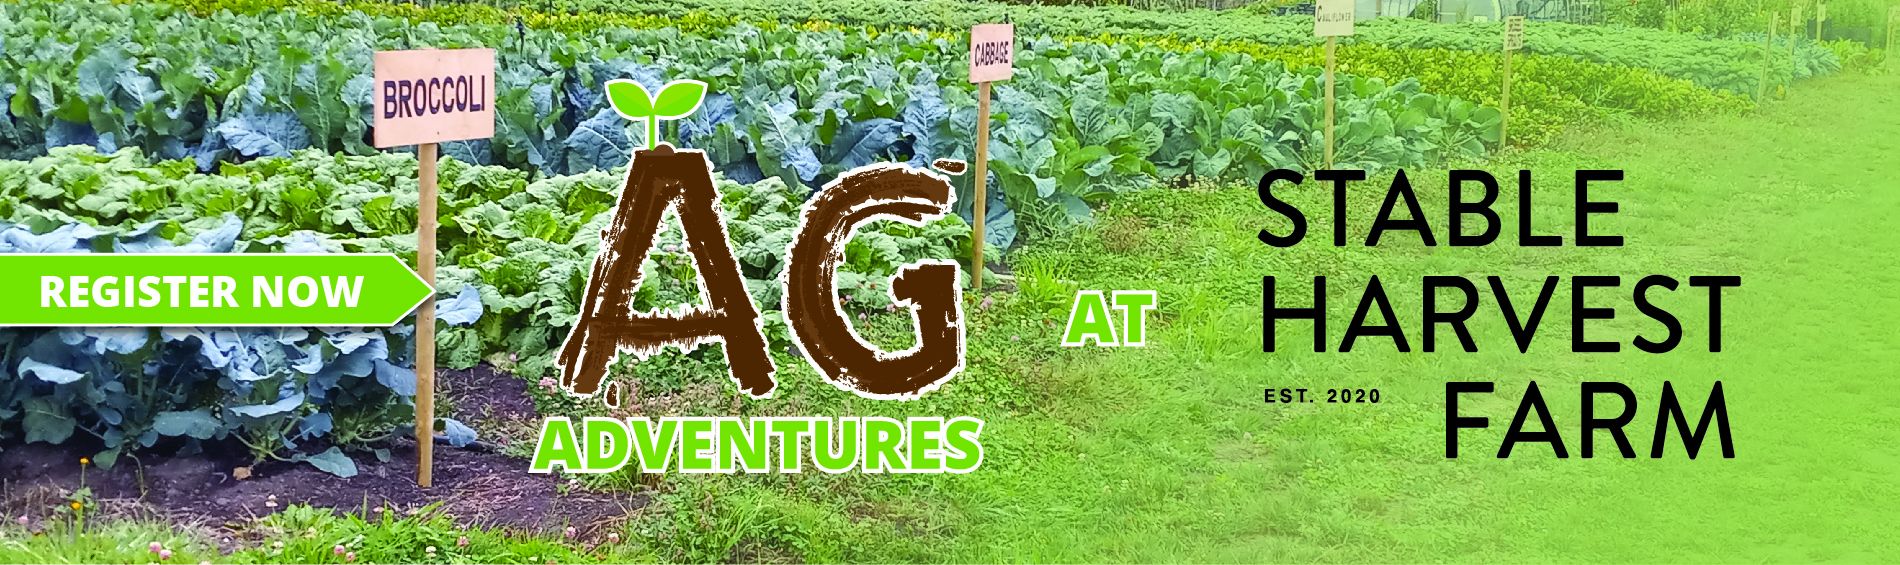 Register Now - Ag Adventures at Stable Harvest Farms 